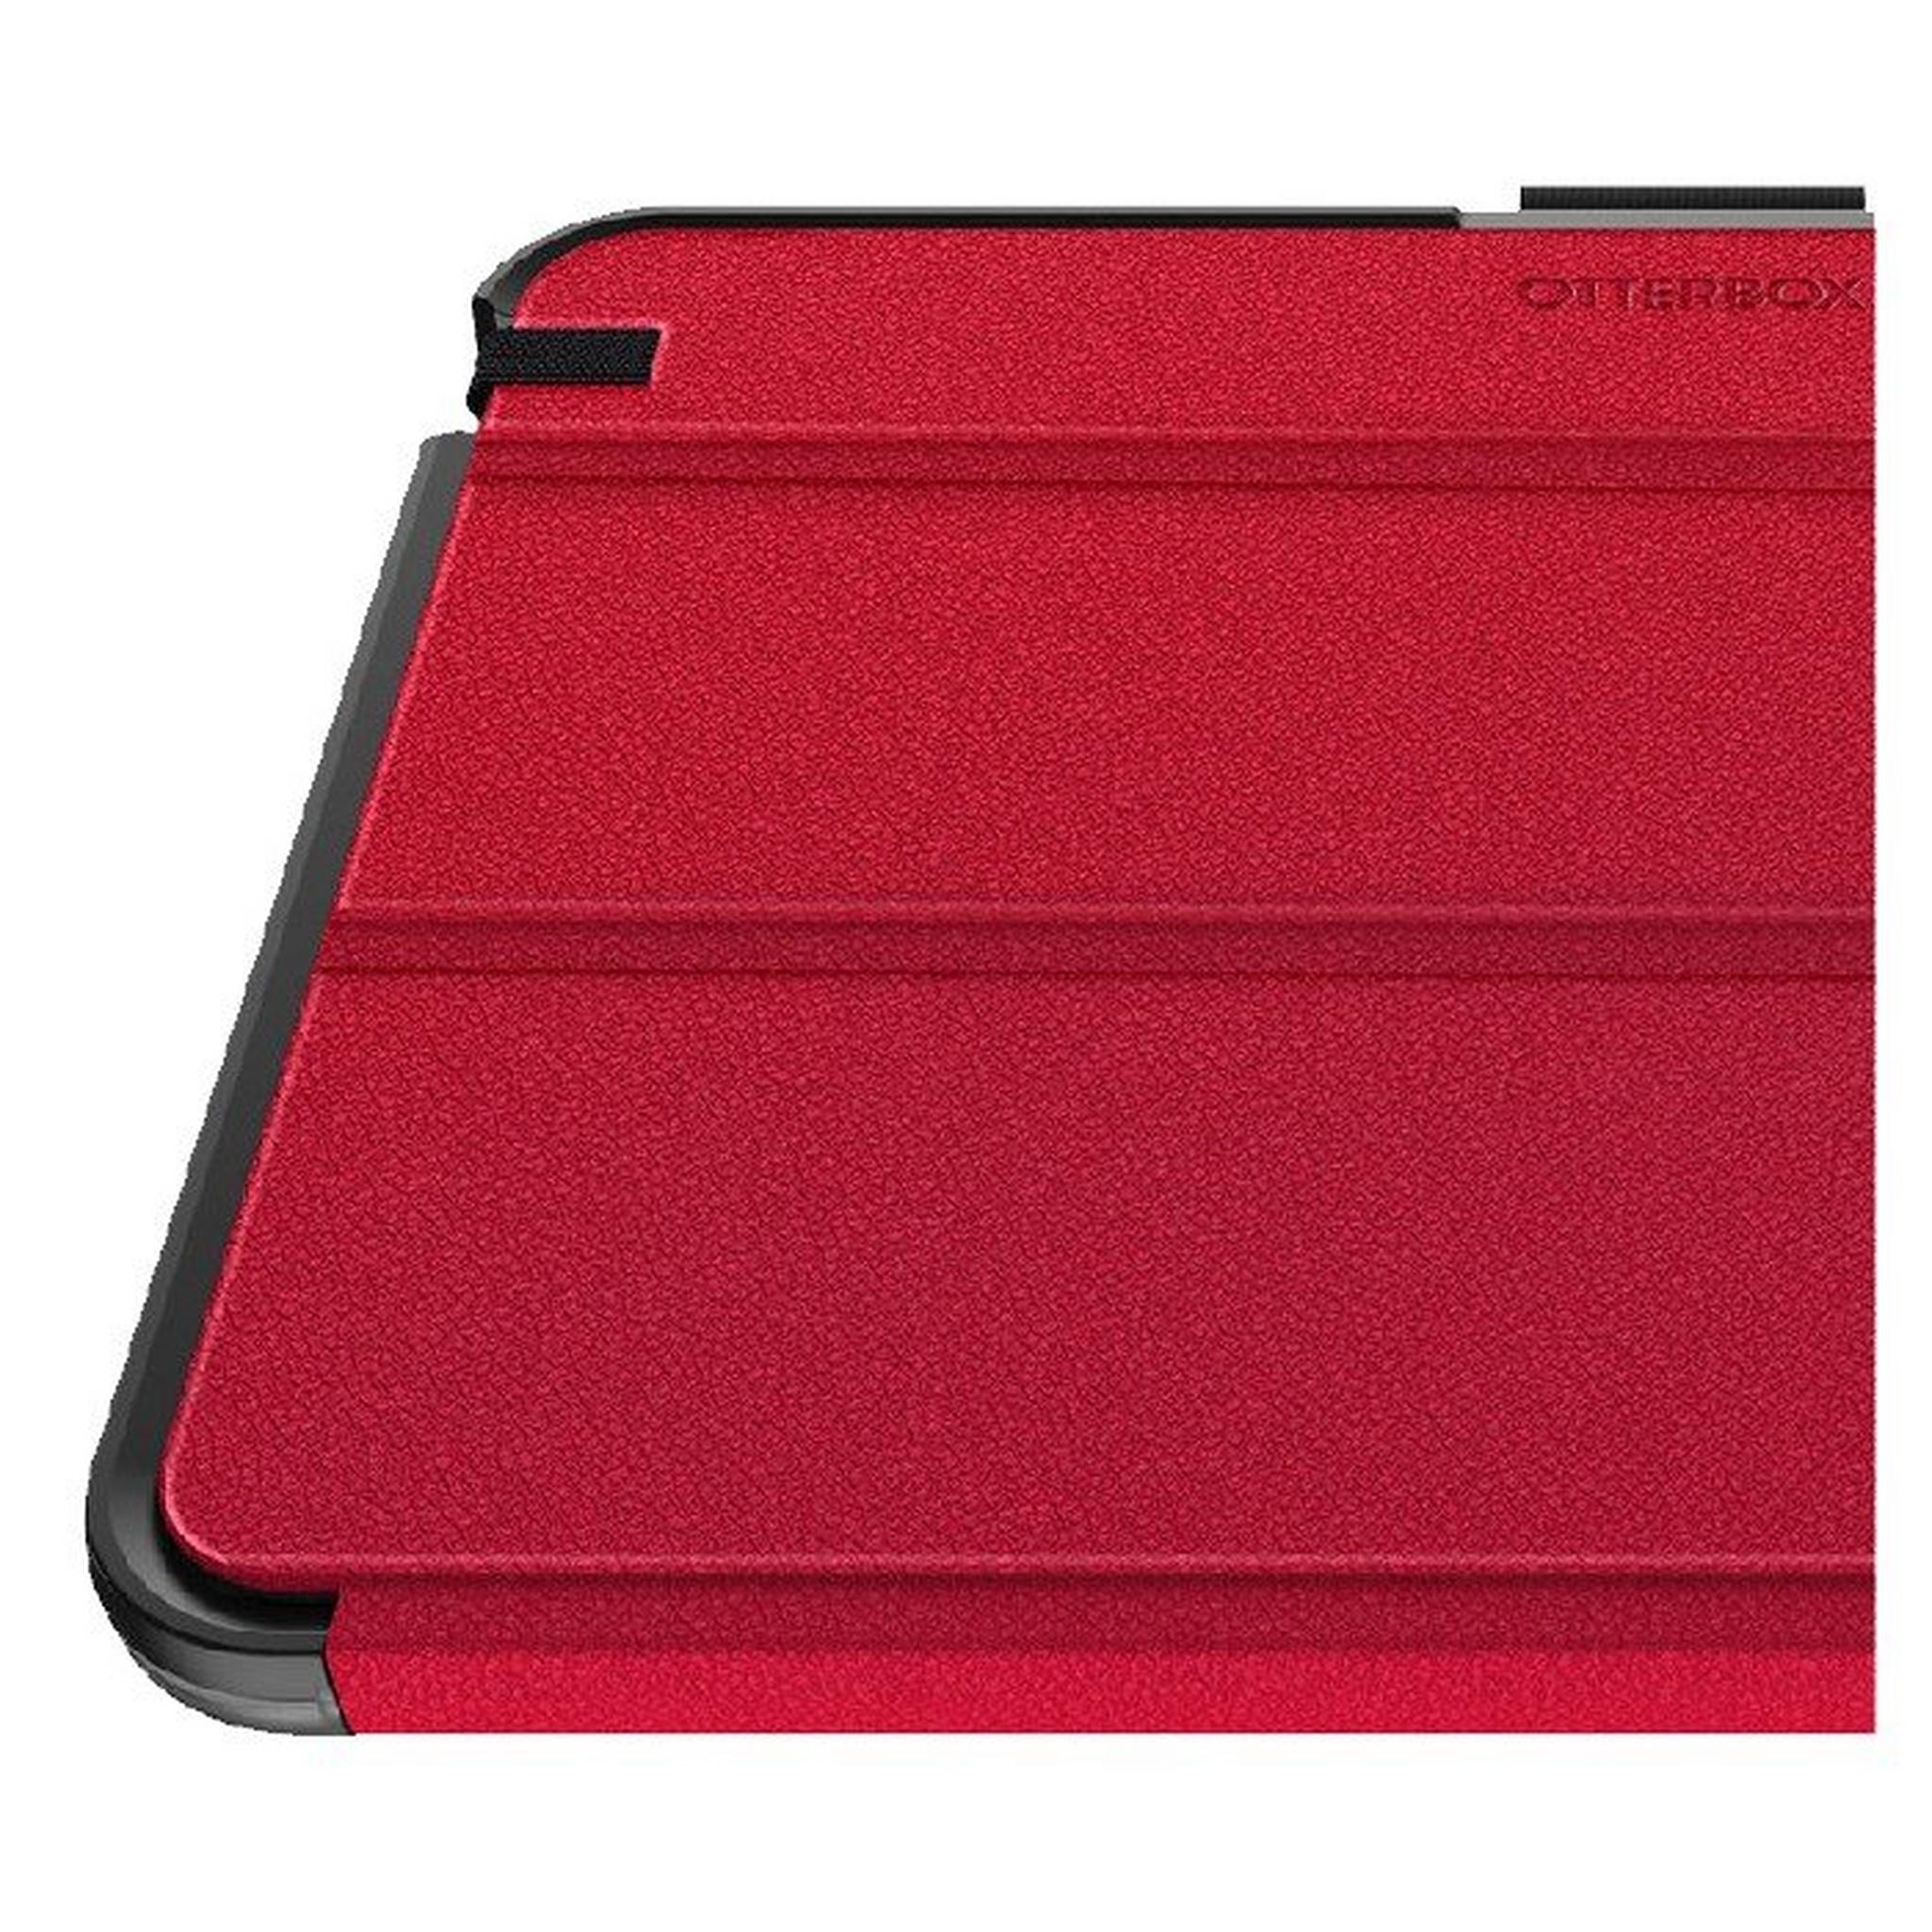 OtterBox Symmetry Folio Case for iPad 10.9 10th Gen, 77-89970 - Red